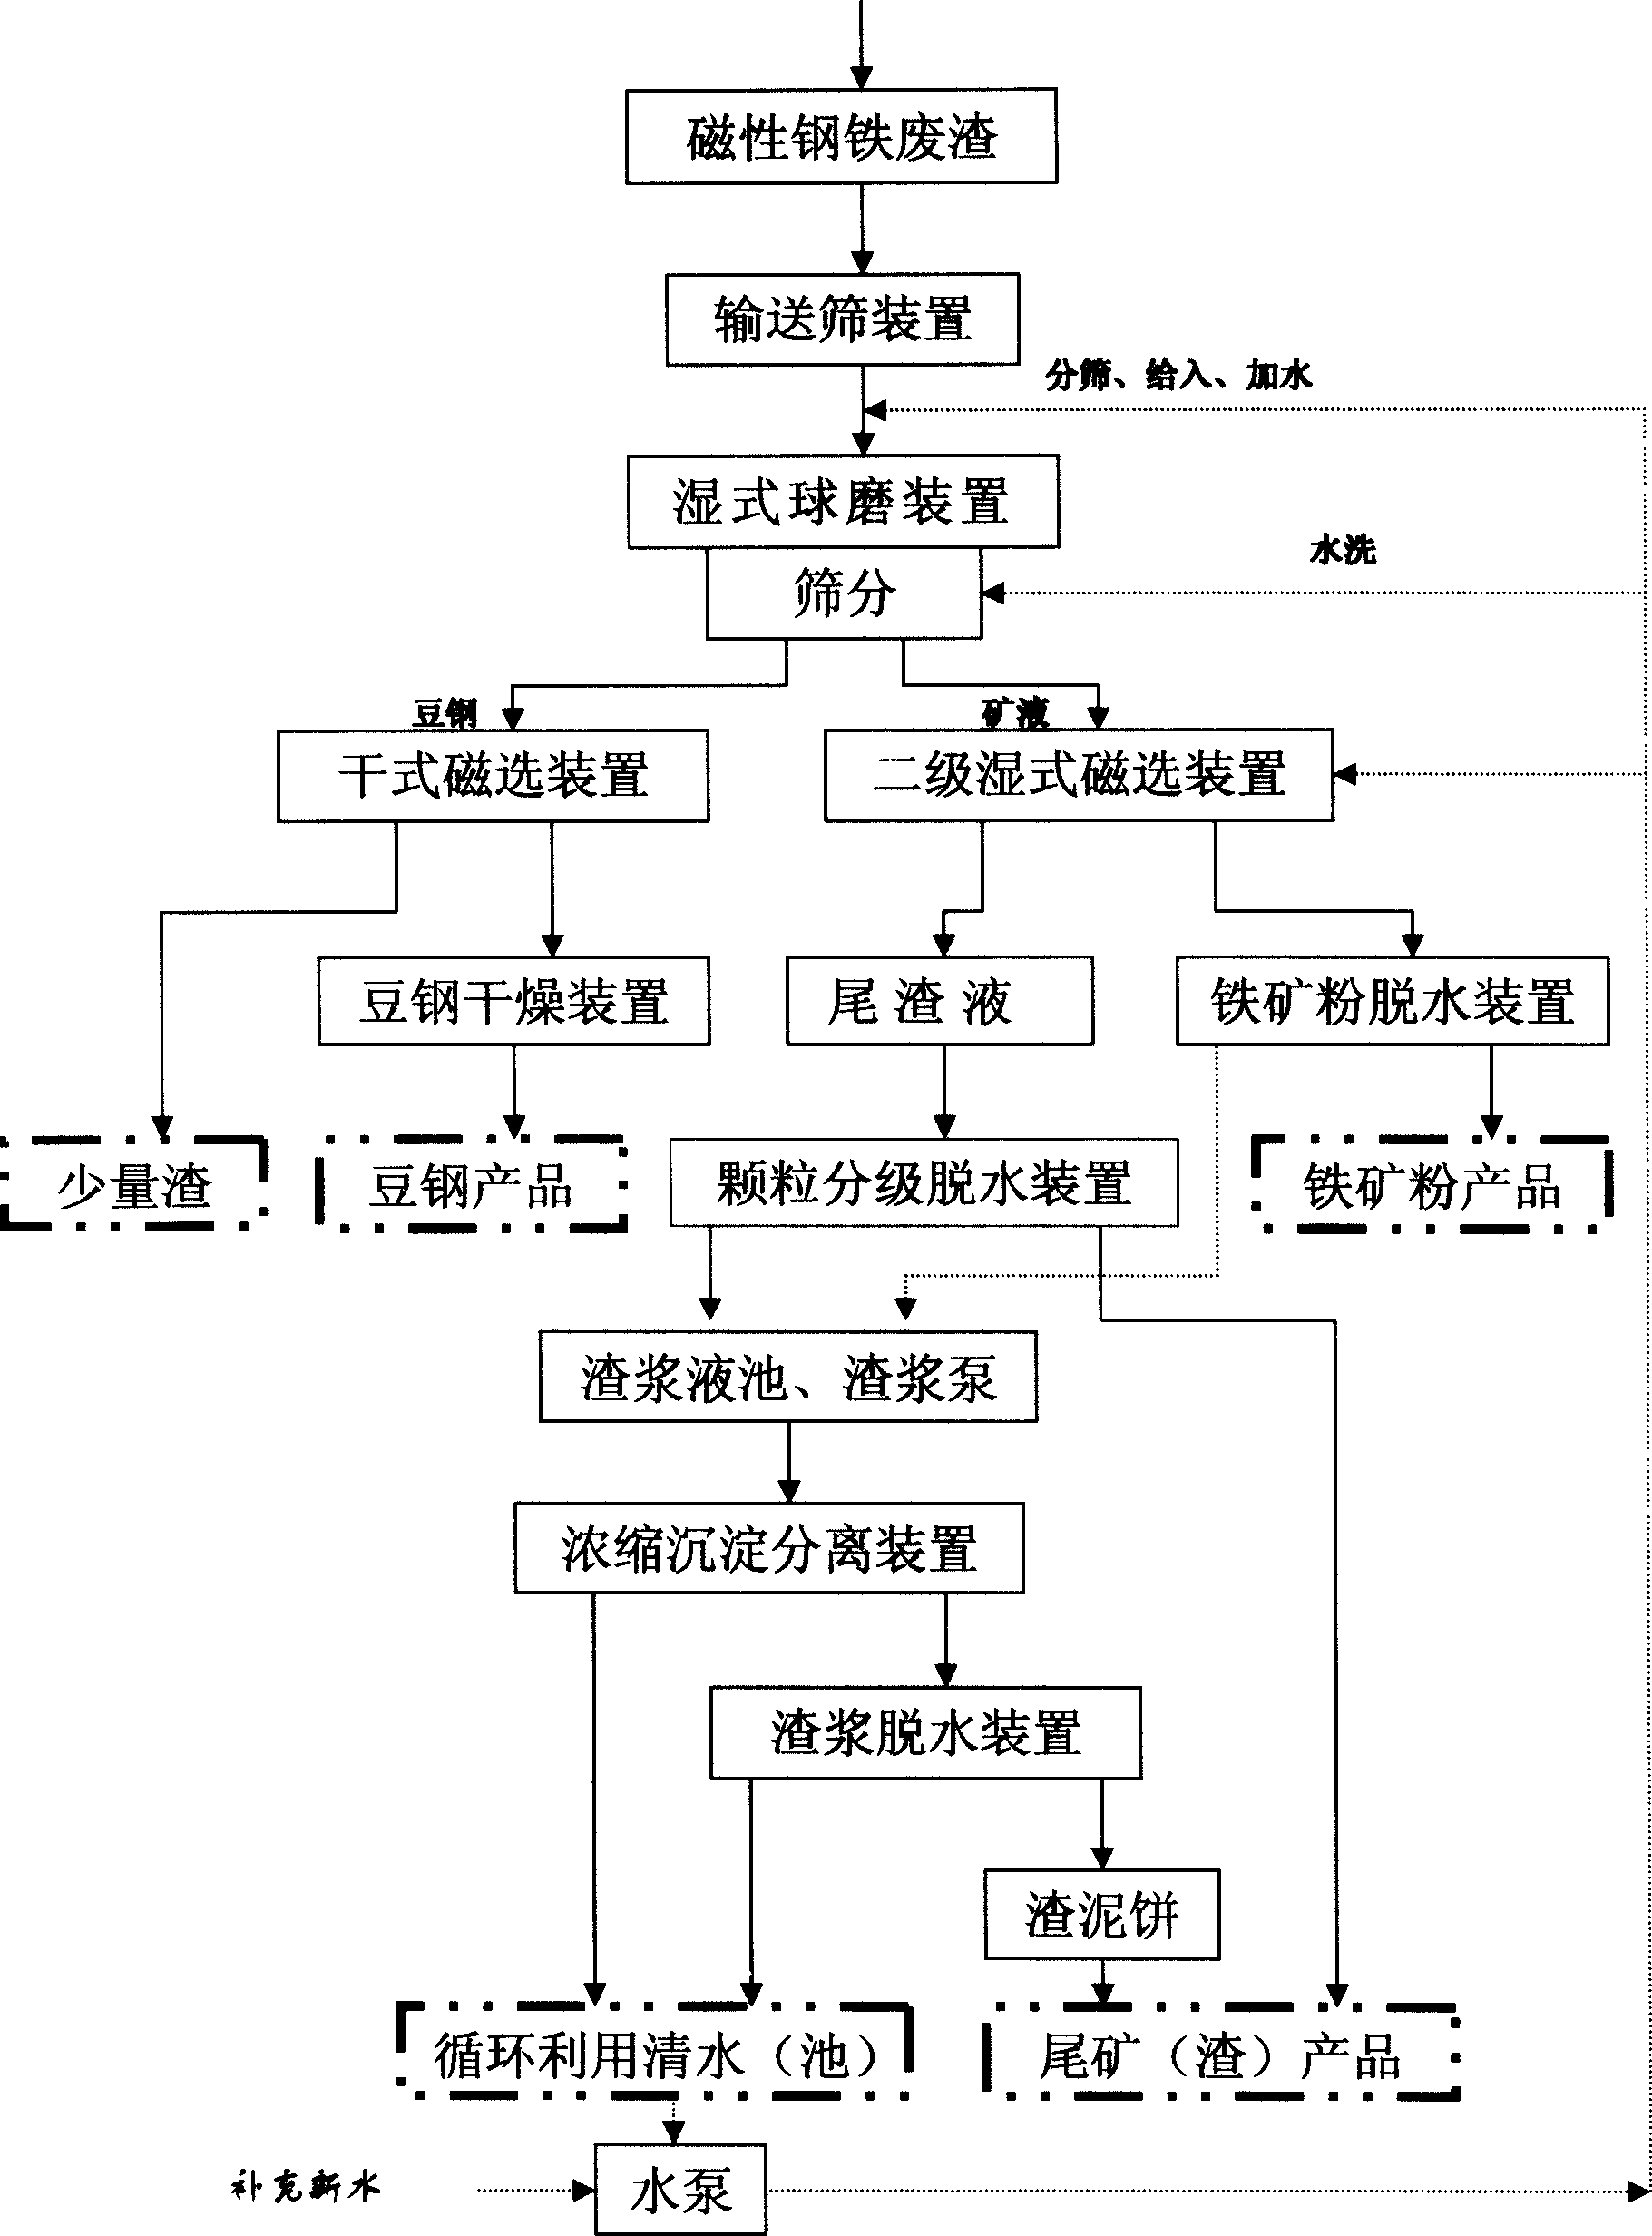 Process for ball milling and water washing of waste iron and steel slag, slag slurry treatment process, and apparatus therefor